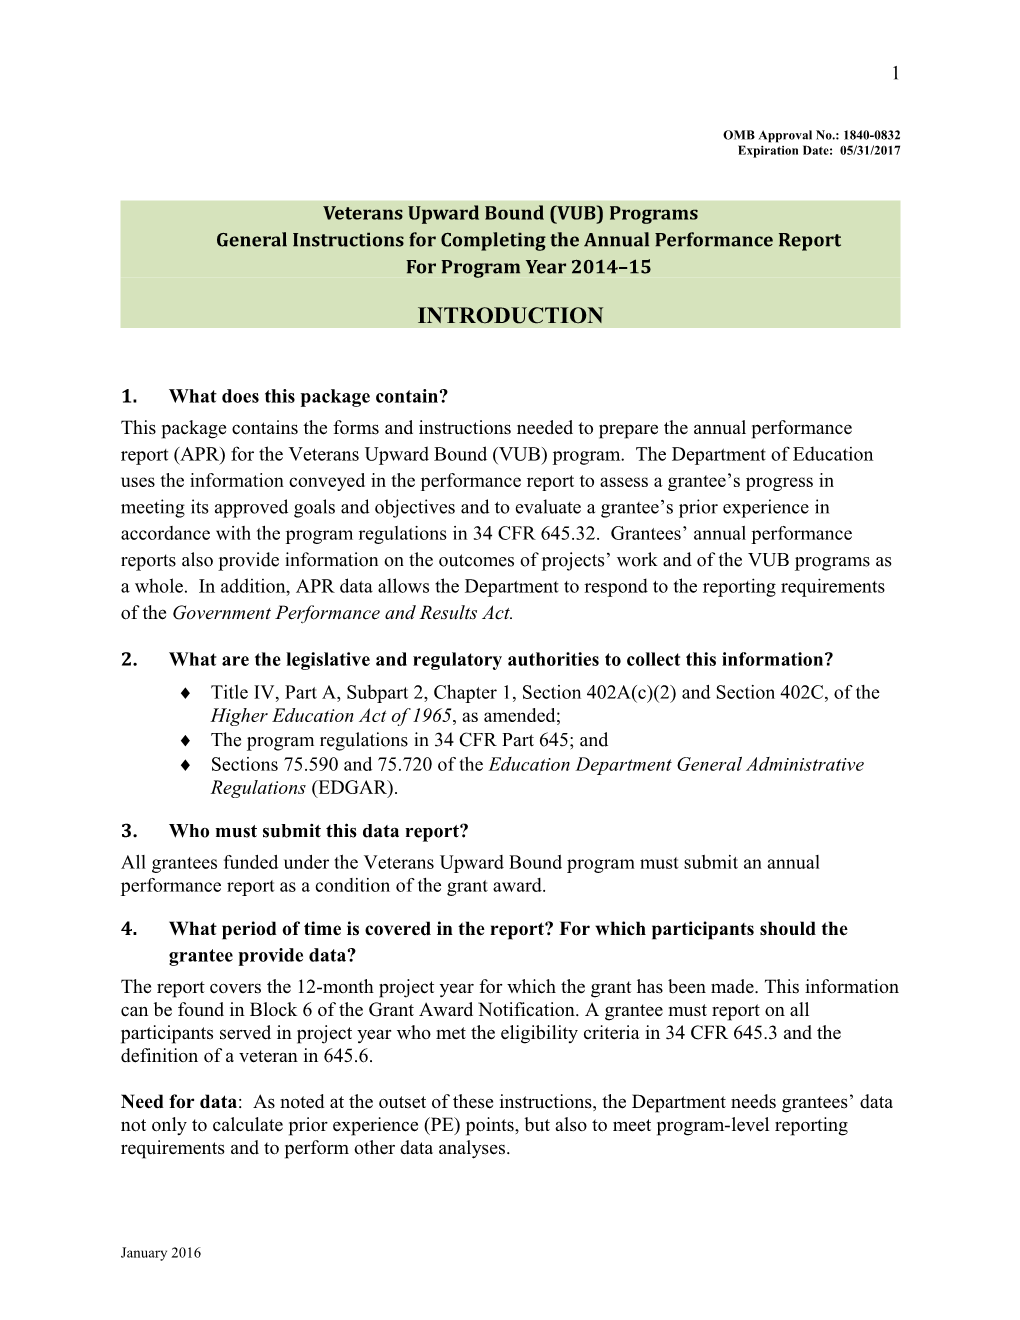 2014-2015 Annual Performance Report Instructions for the Veterans Upward Bound Program (MS Word)